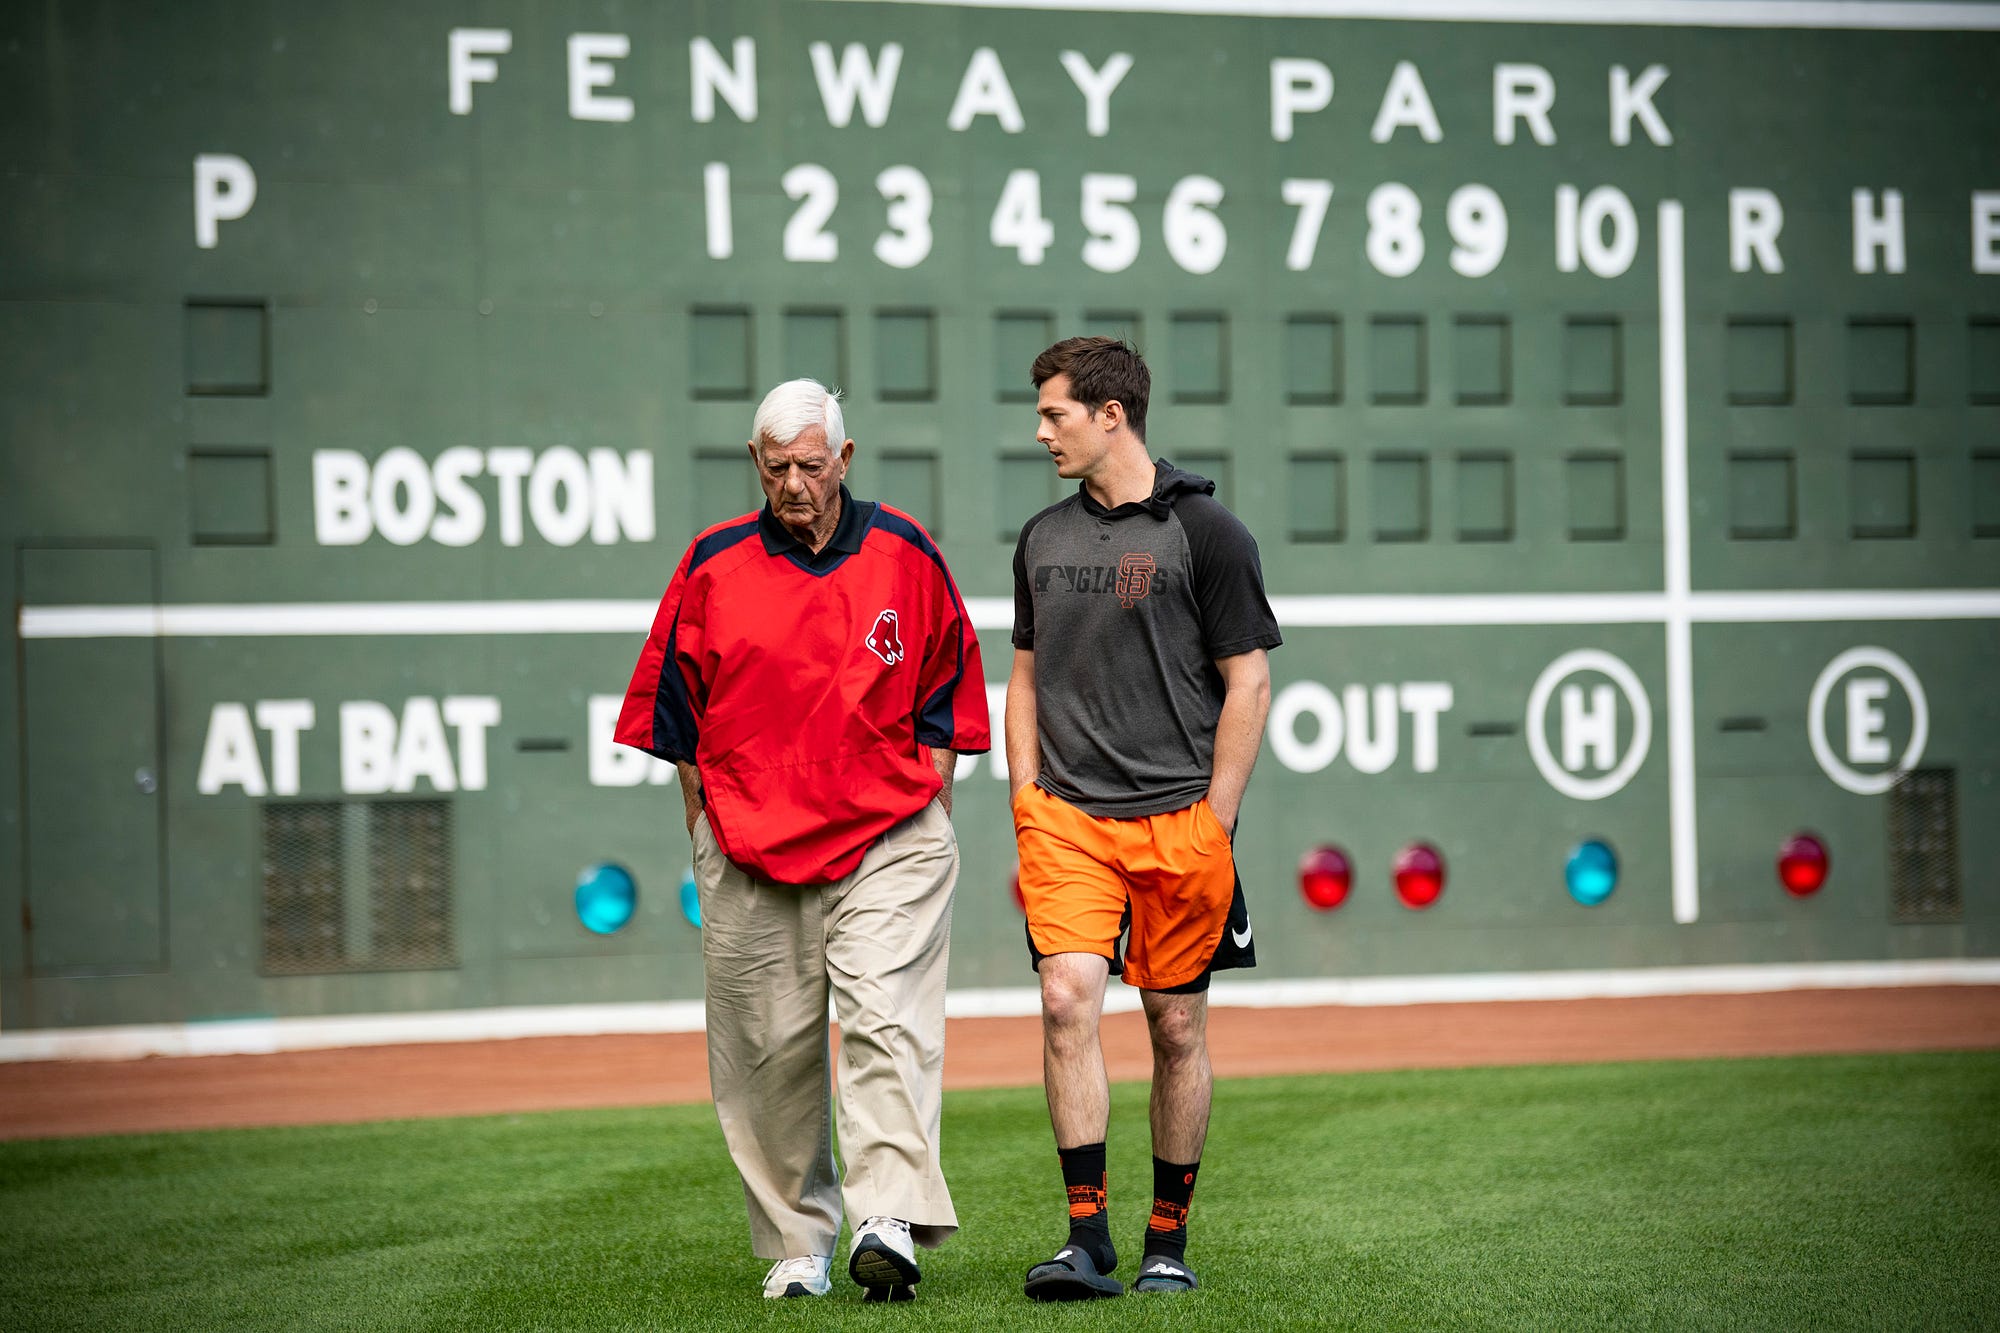 Red Sox legend Carl Yastrzemski throws out first pitch to grandson Mike